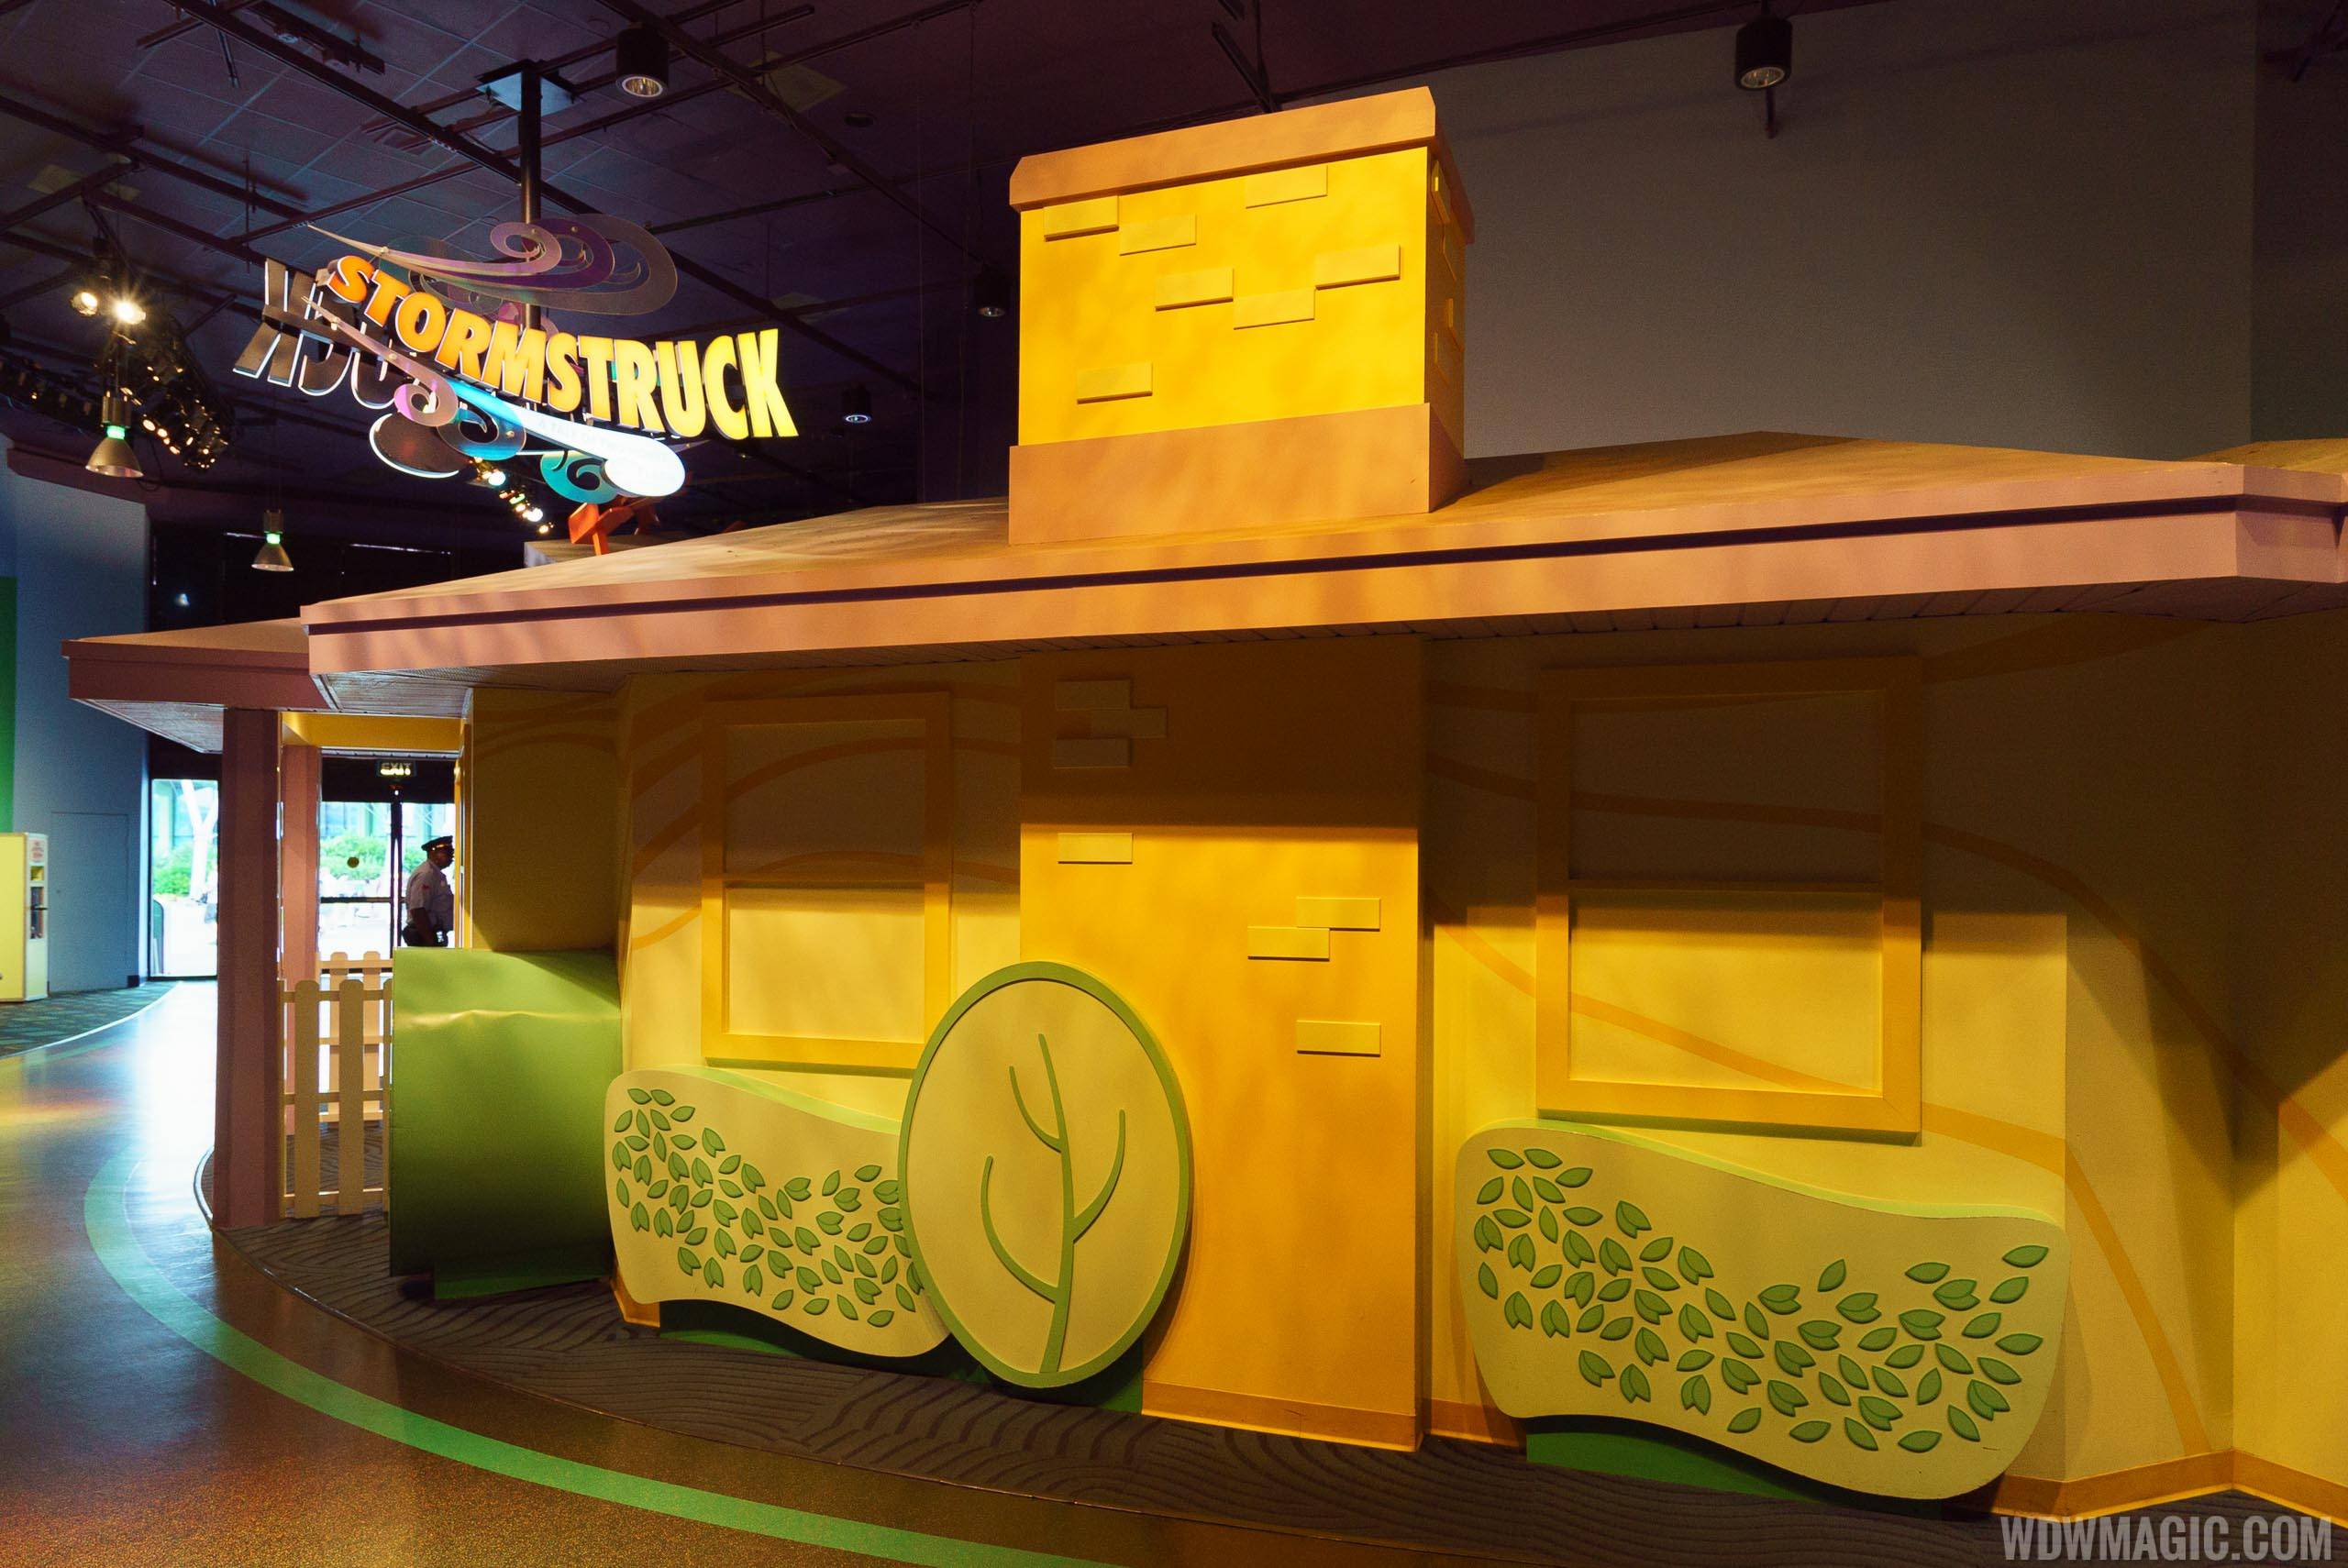 New Innoventions attraction to teach storm safety